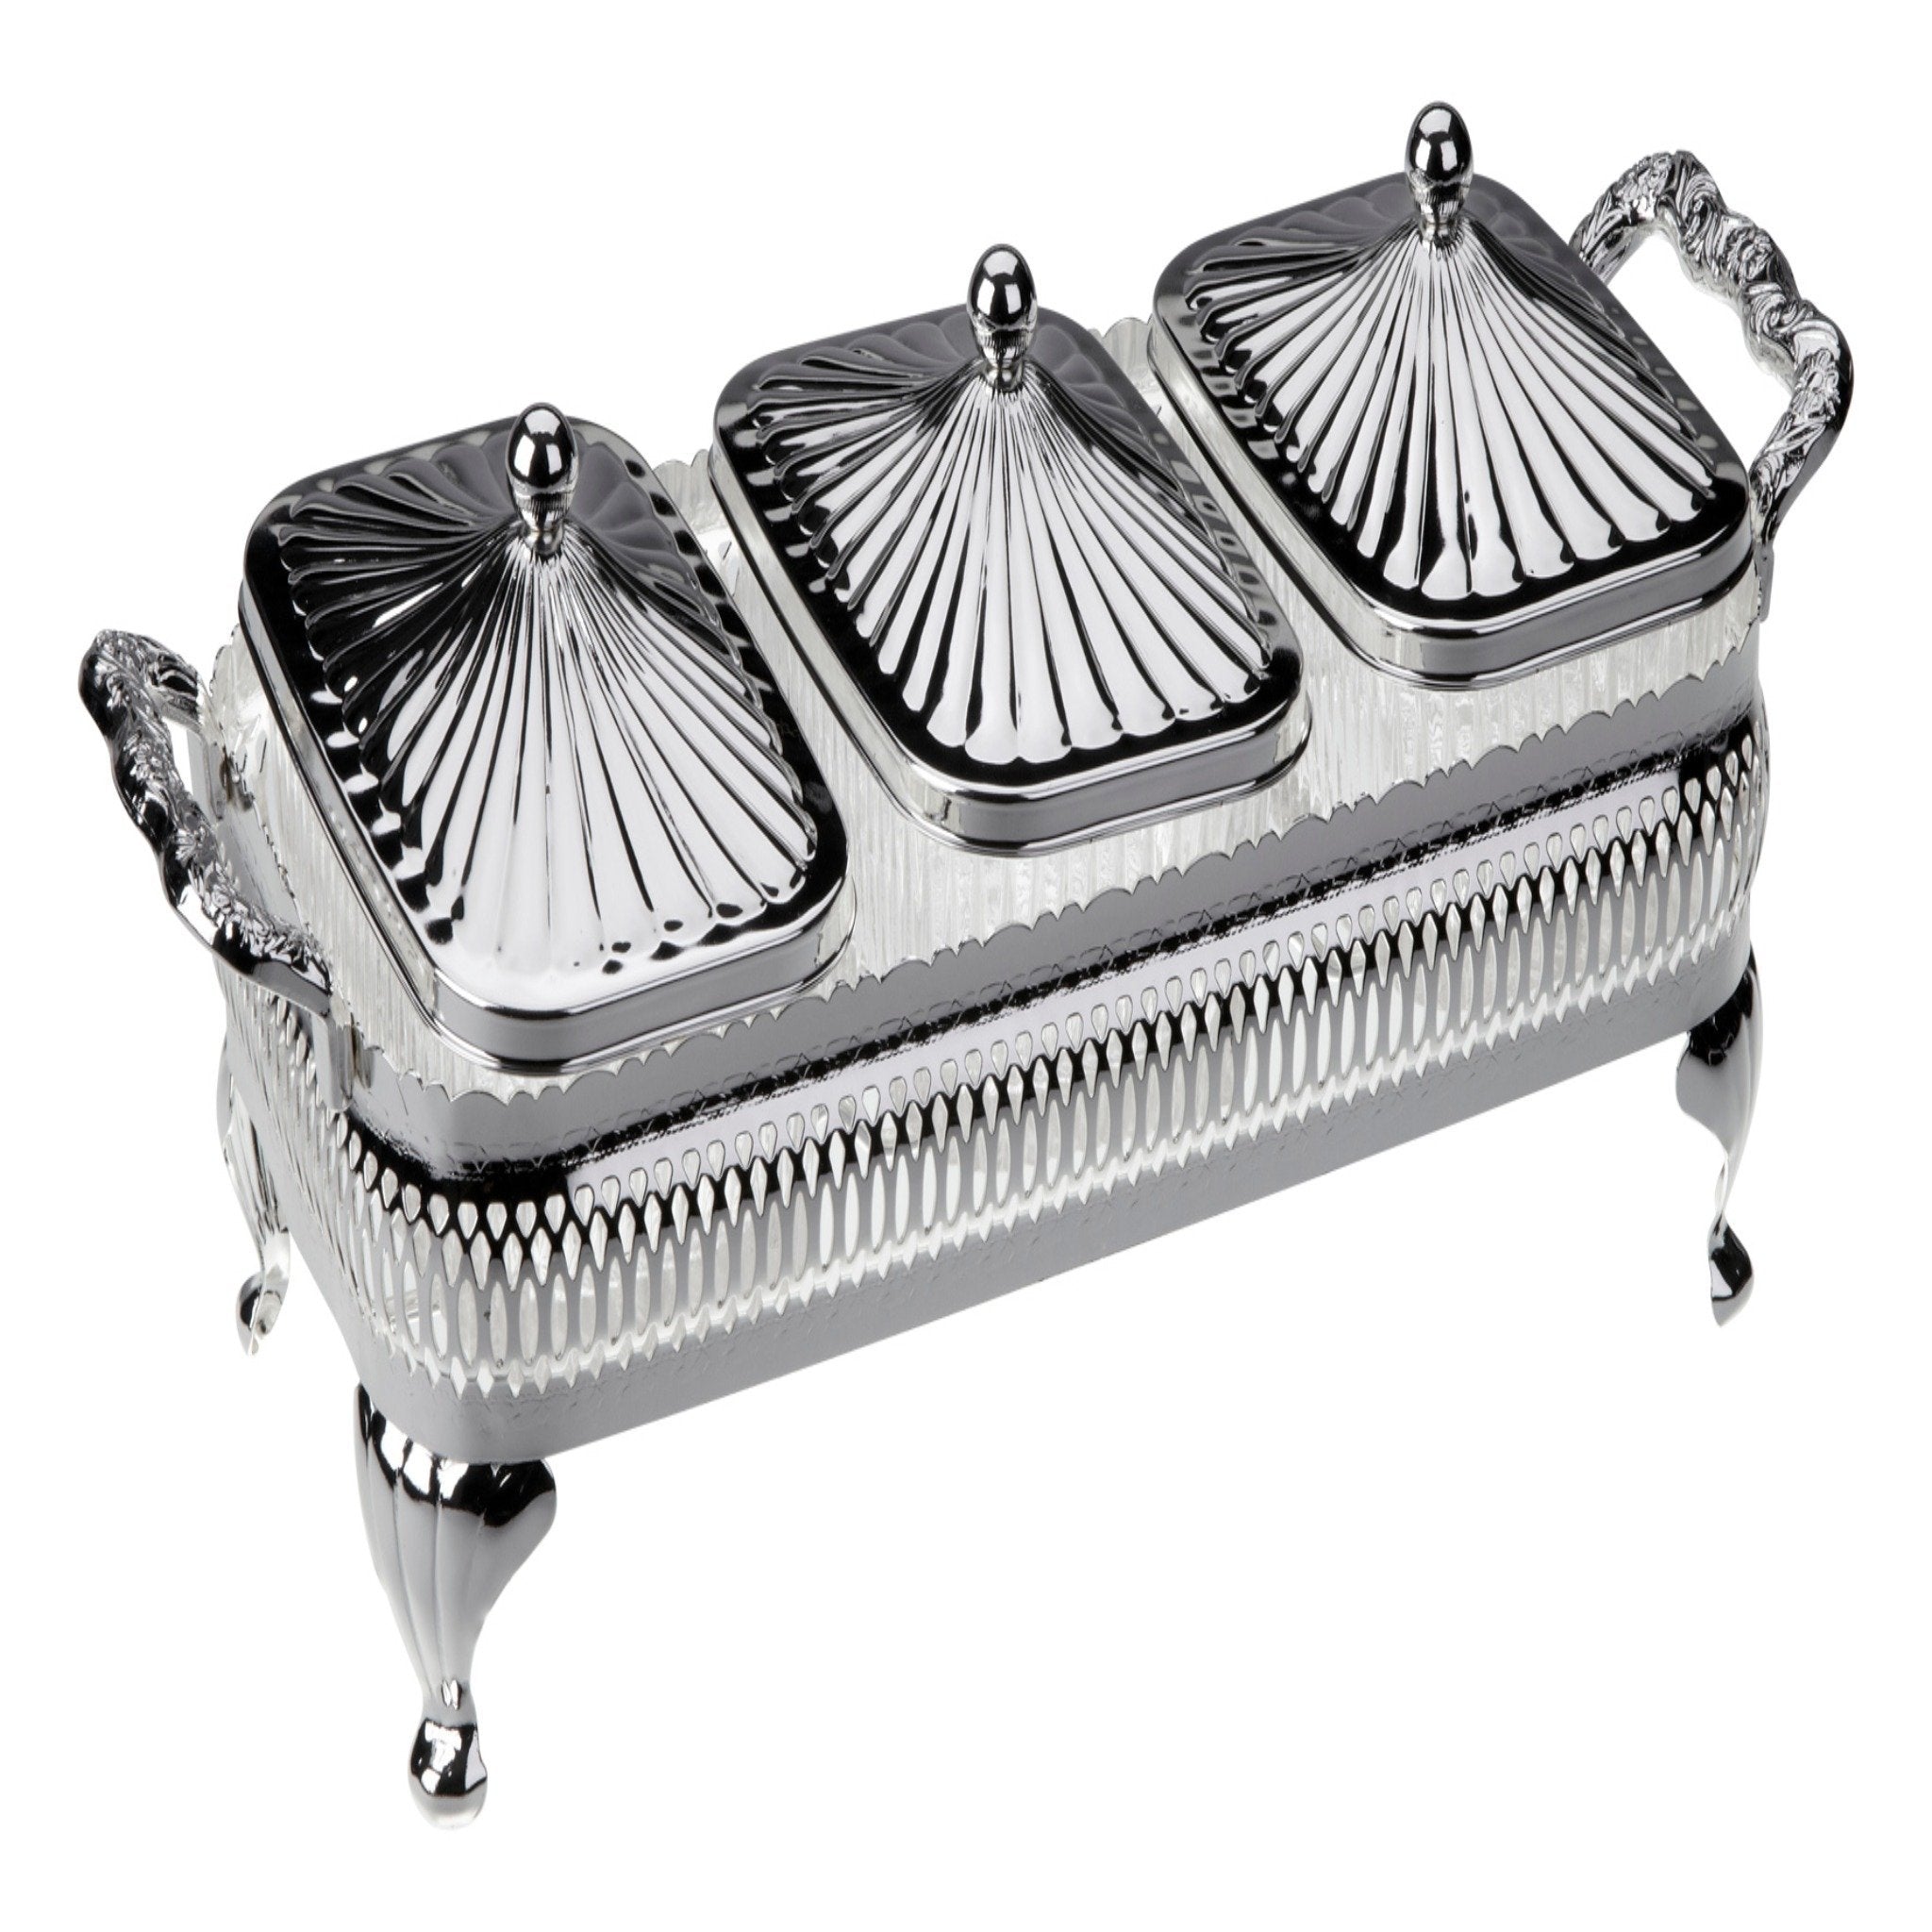 Queen Anne - Rectangular Bowl Set with Silver Plated Stand 3 Pieces - Silver Plated Metal & Glass - 30x13.5 cm - 26000340